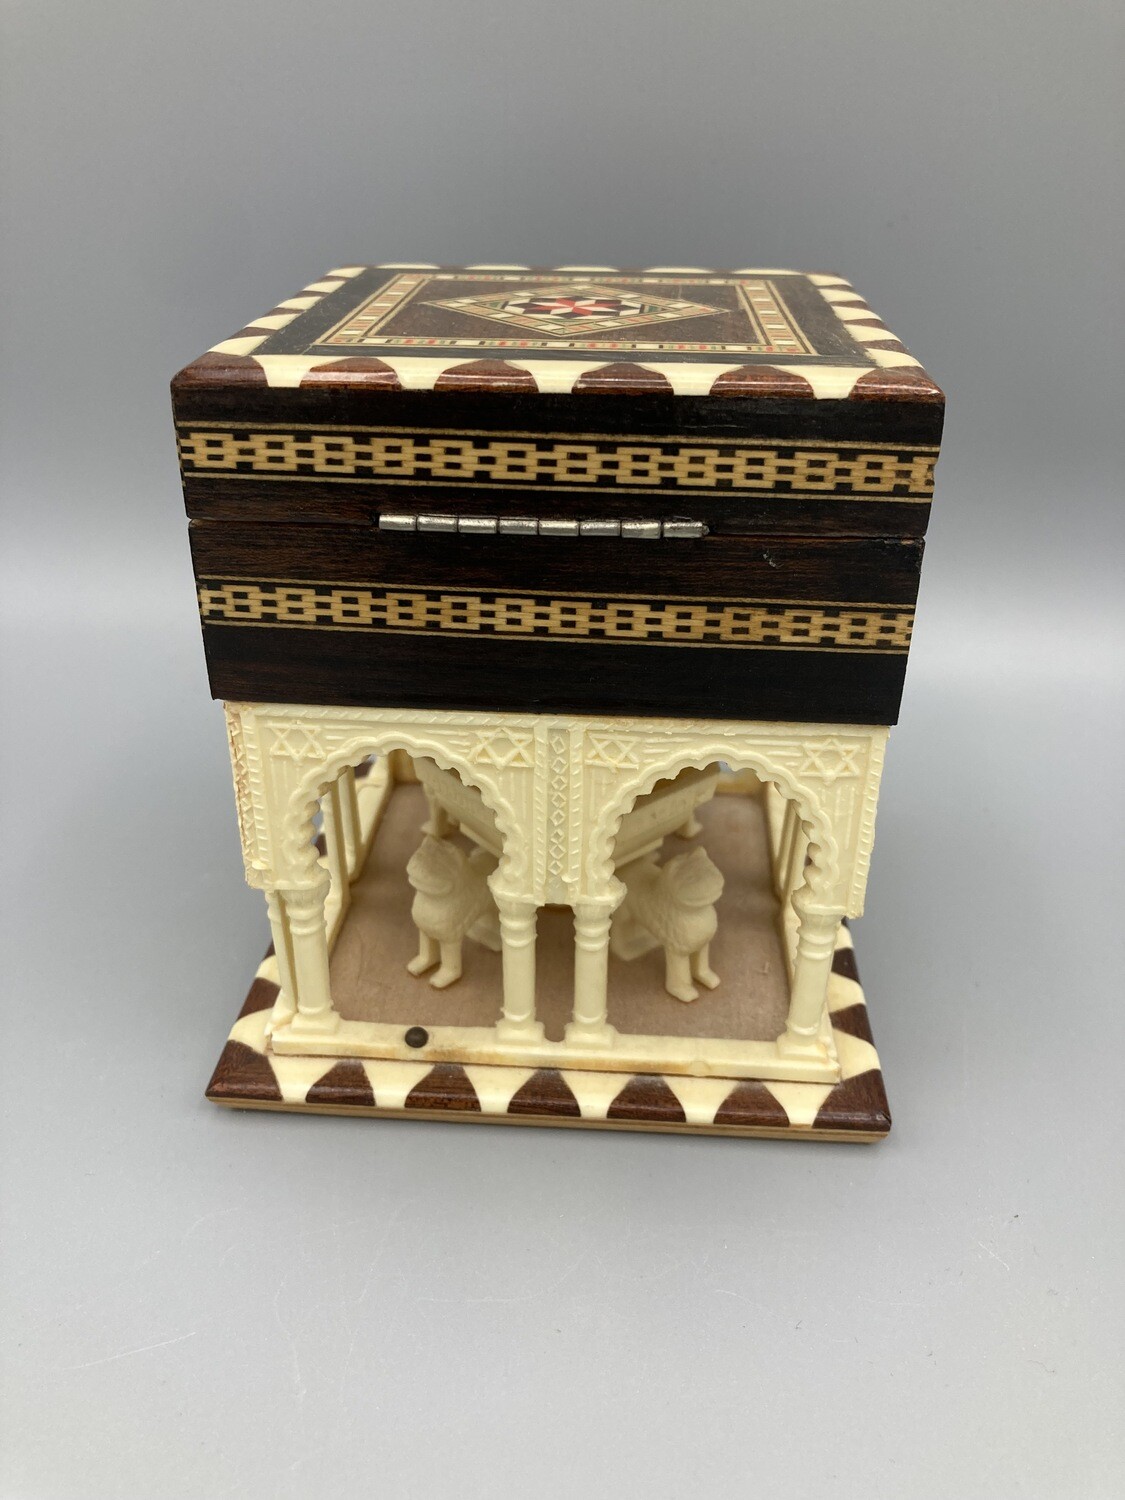 Alhambra Fountain and Palace Jewelry Box